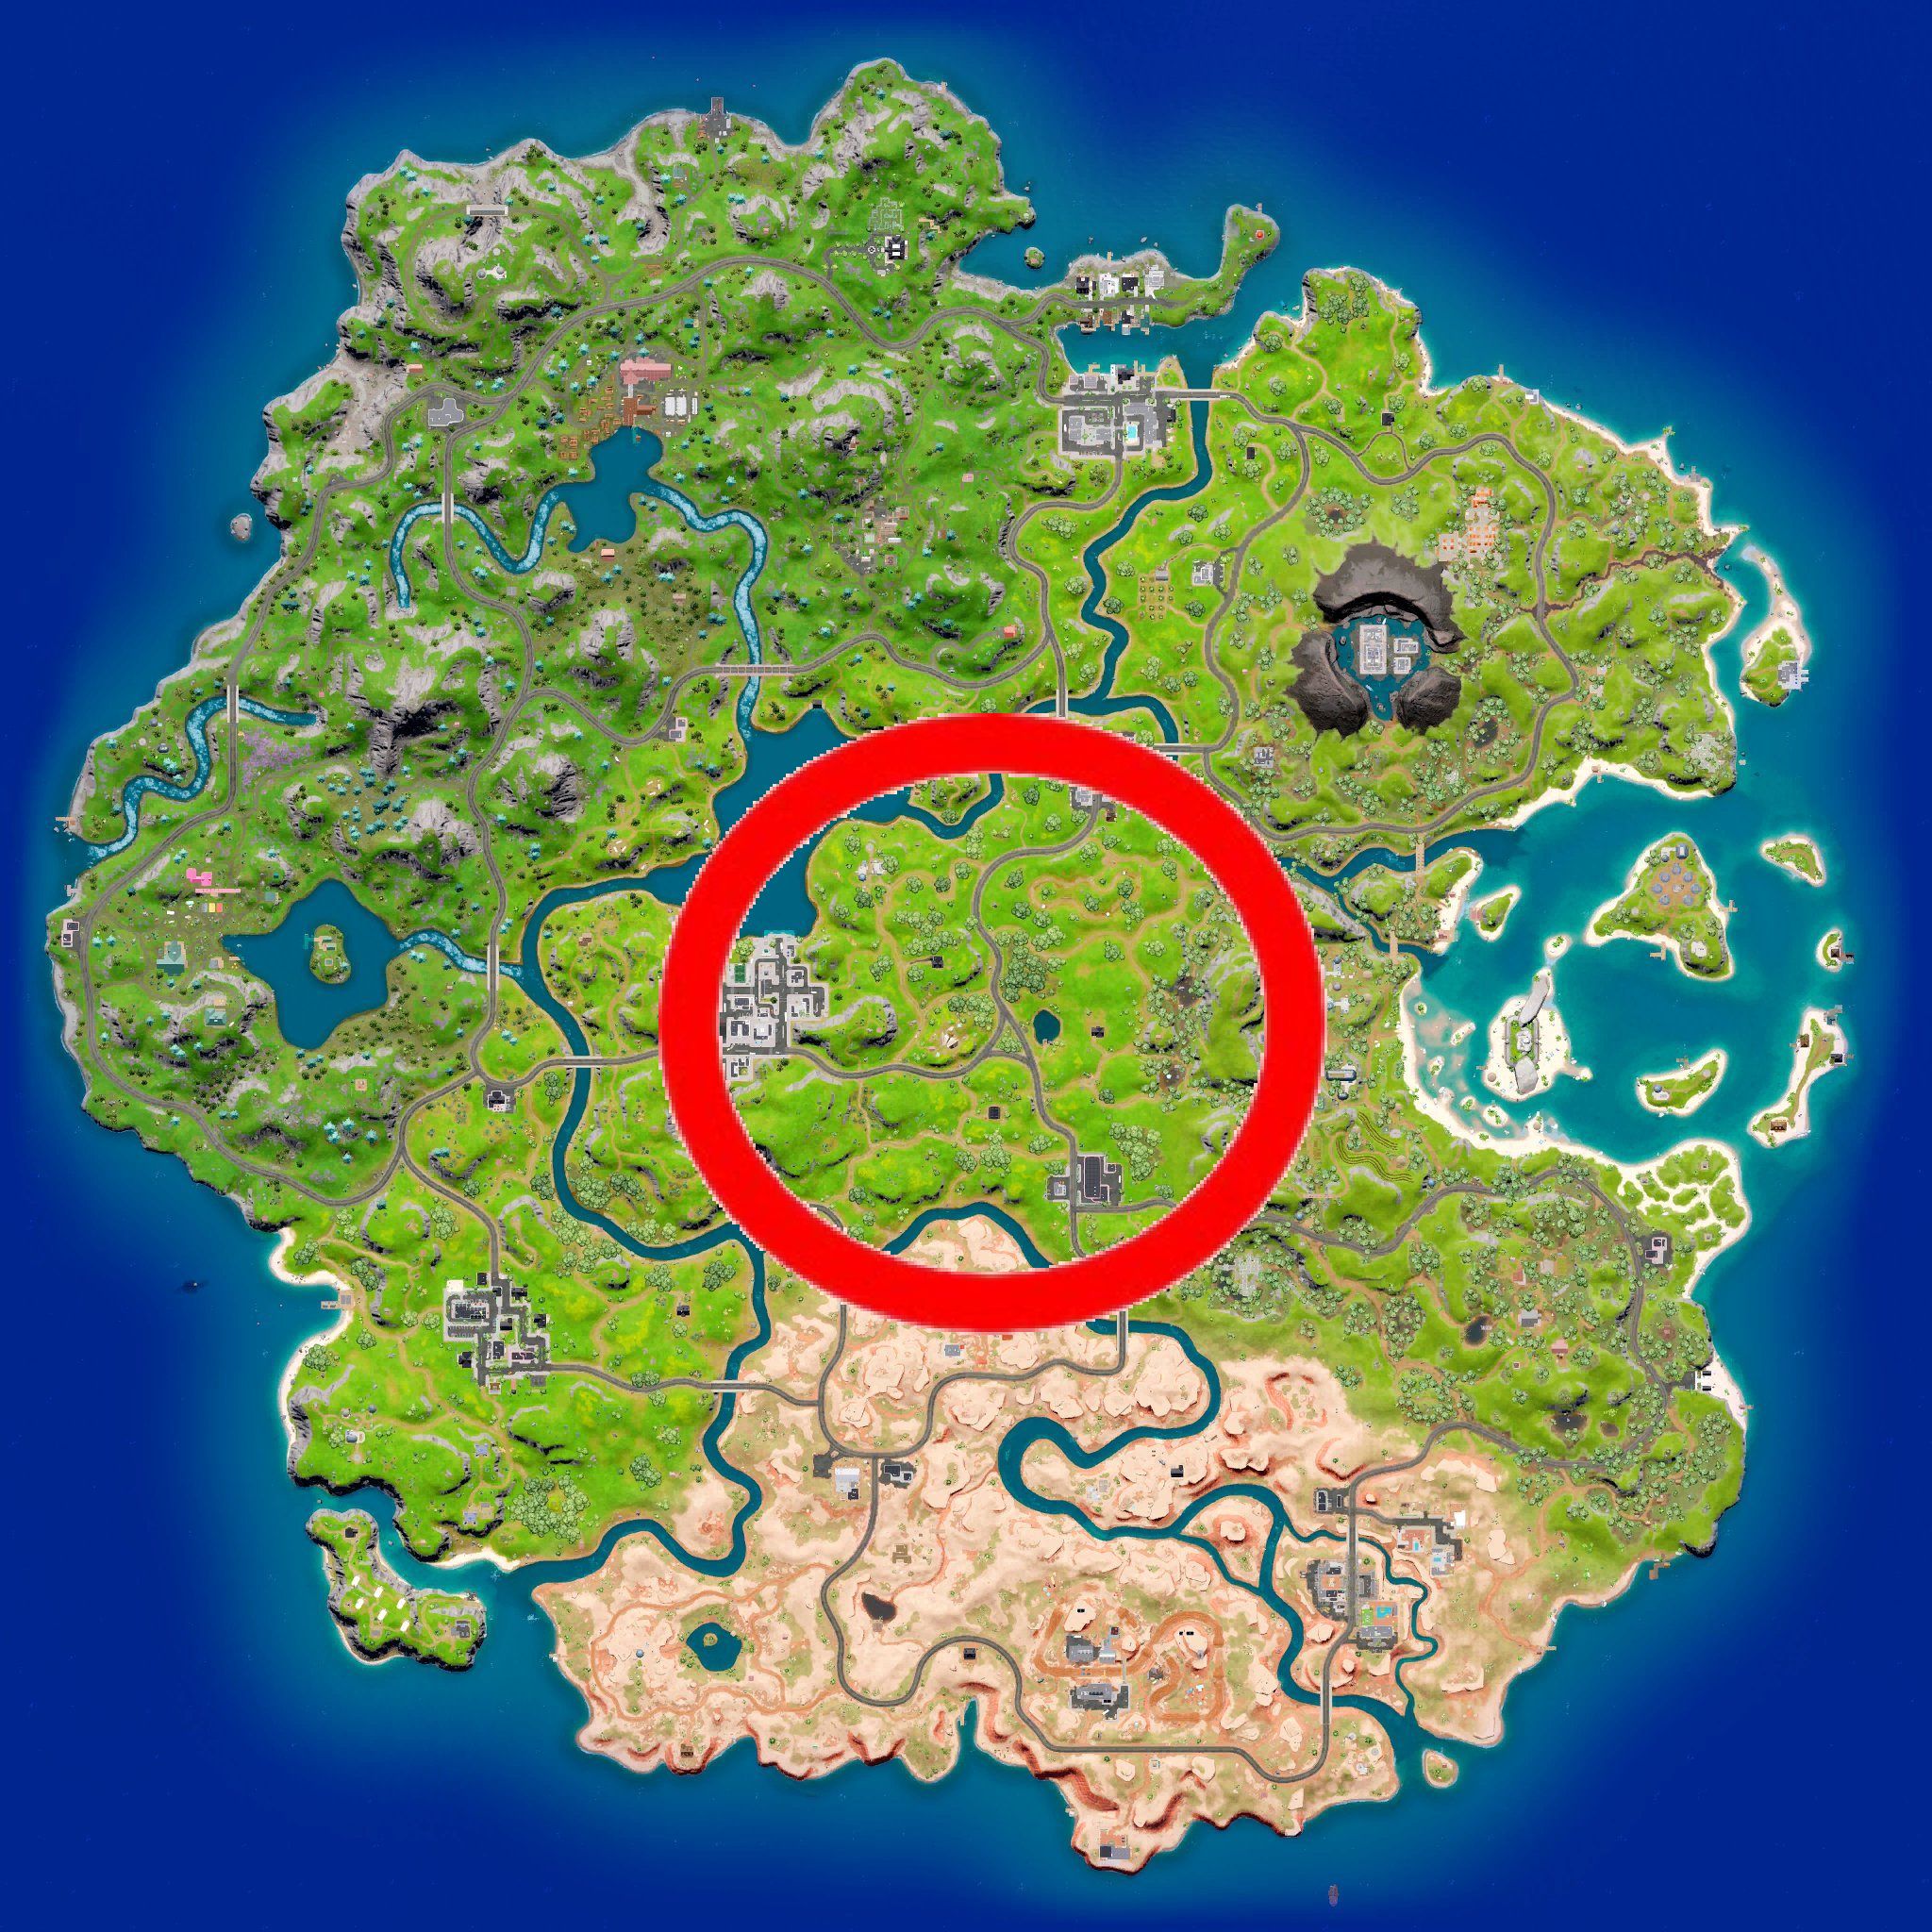 Fortnite Klomberry general spawn location